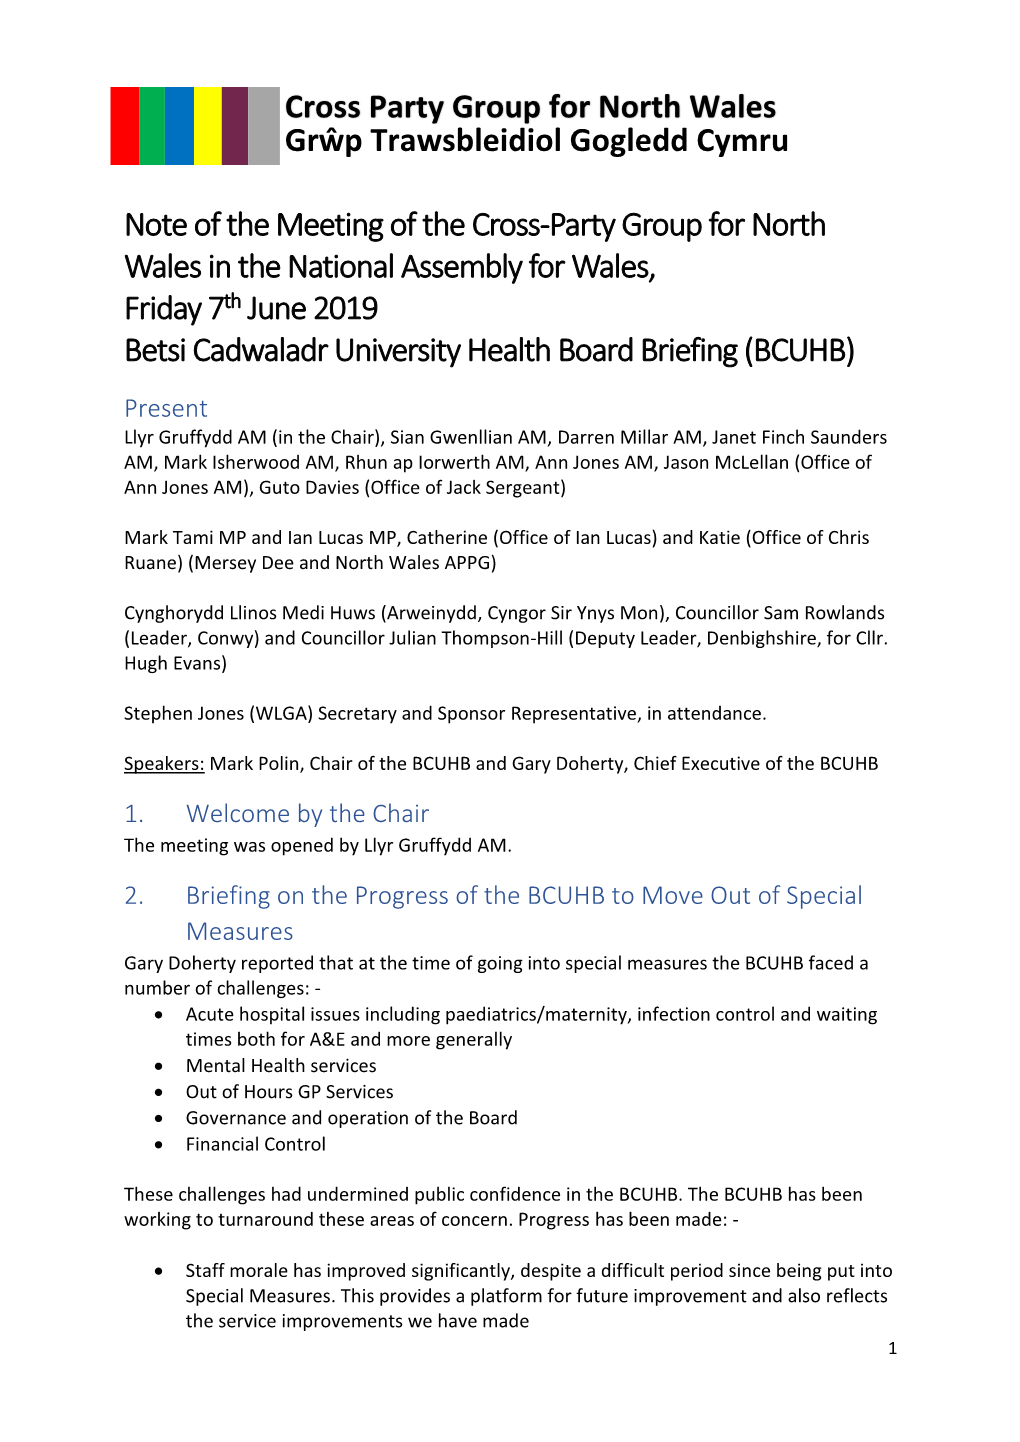 Note of the Meeting of the Cross-Party Group for North Wales in the National Assembly for Wales, Friday 7Th June 2019 Betsi Cadw